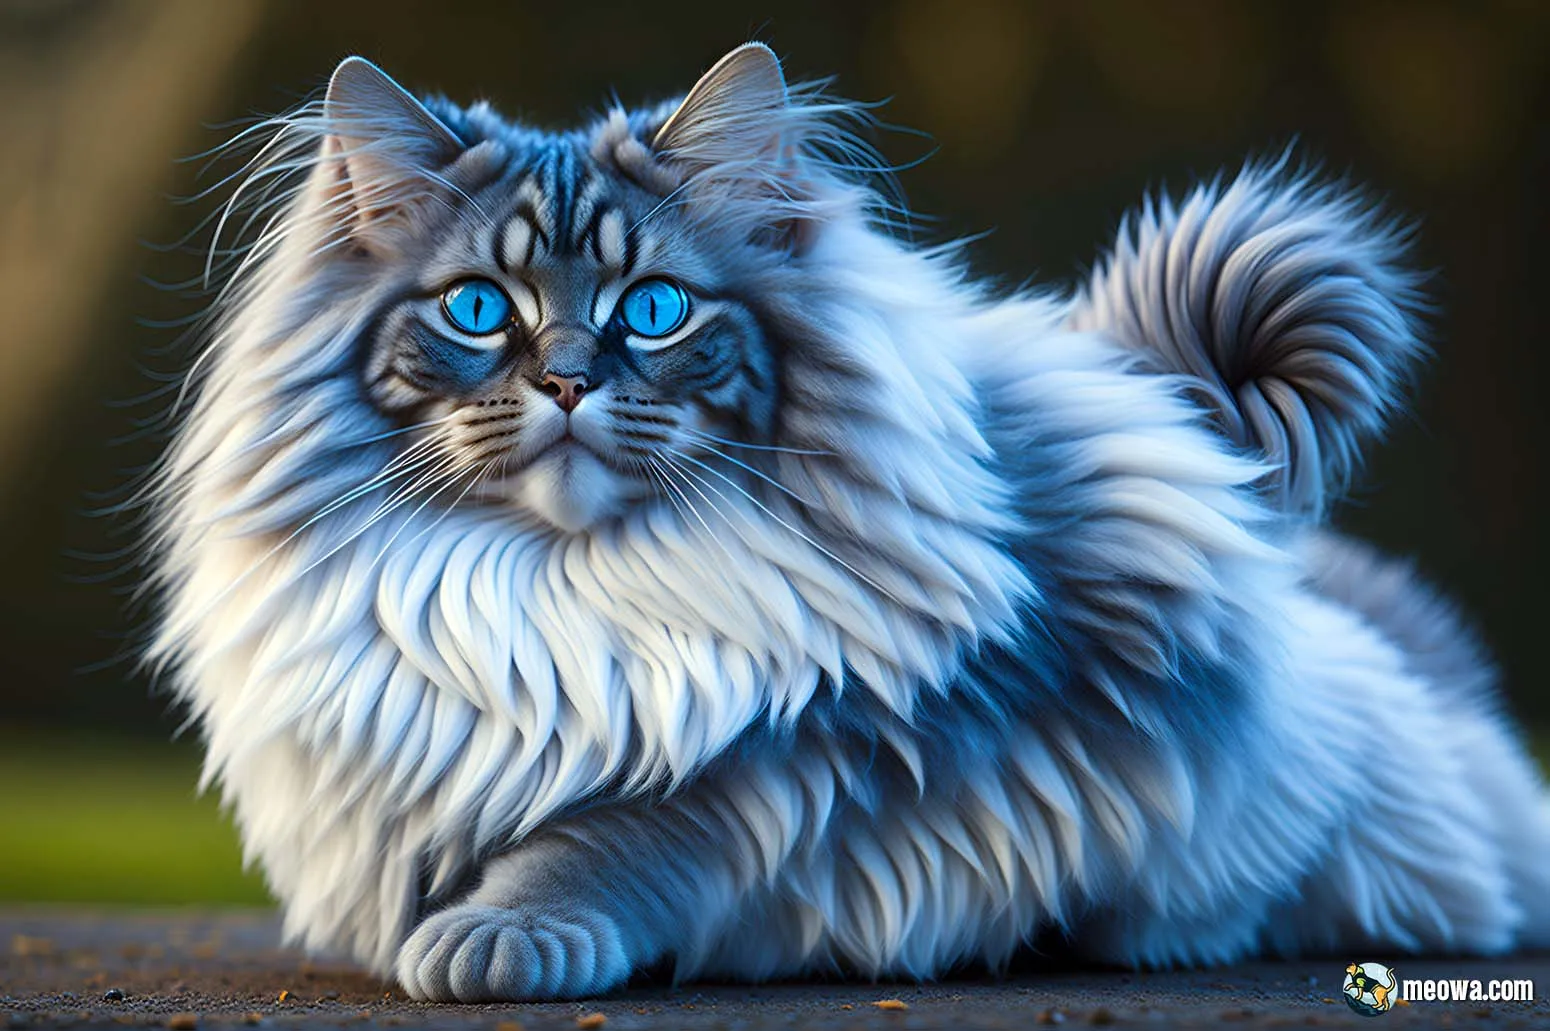 The Siberian cat breed is a flawless fusion of grace and sophistication, creating an impeccable blend of elegance and playfulness. These majestic cats possess a faultless mixture of refinement and liveliness, making them the epitome of feline perfection.